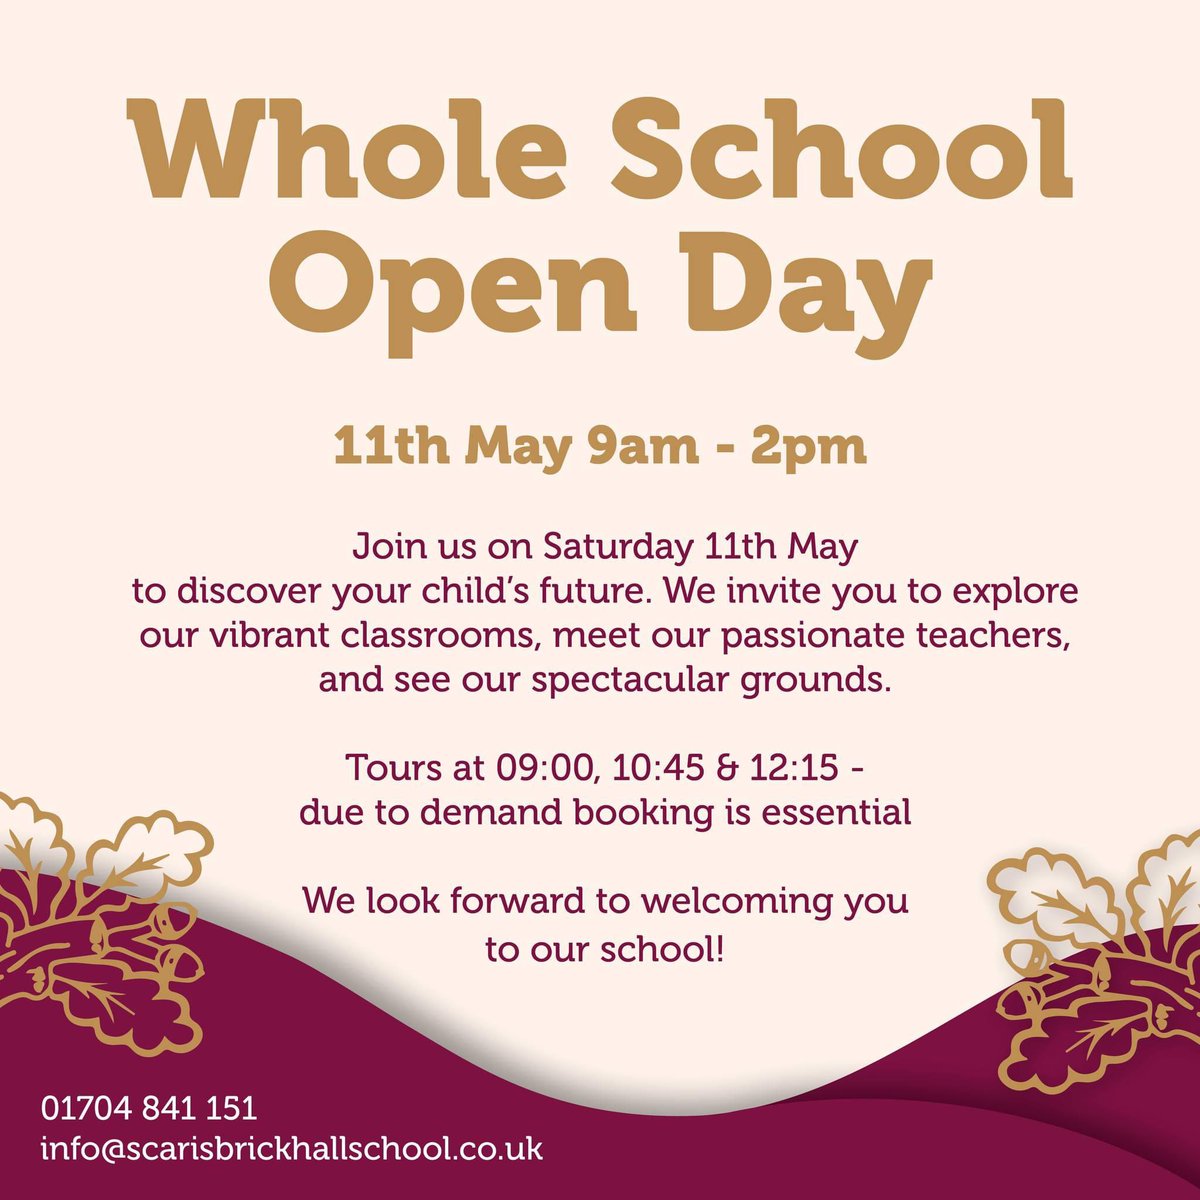 Join us on Saturday 11th May to discover your child’s future. We invite you to explore our vibrant classrooms, meet our passionate teachers, and see our spectacular grounds. Tours at 09:00, 10:45 & 12:15 - due to demand booking is essential Booking link: trybooking.com/uk/events/land…?